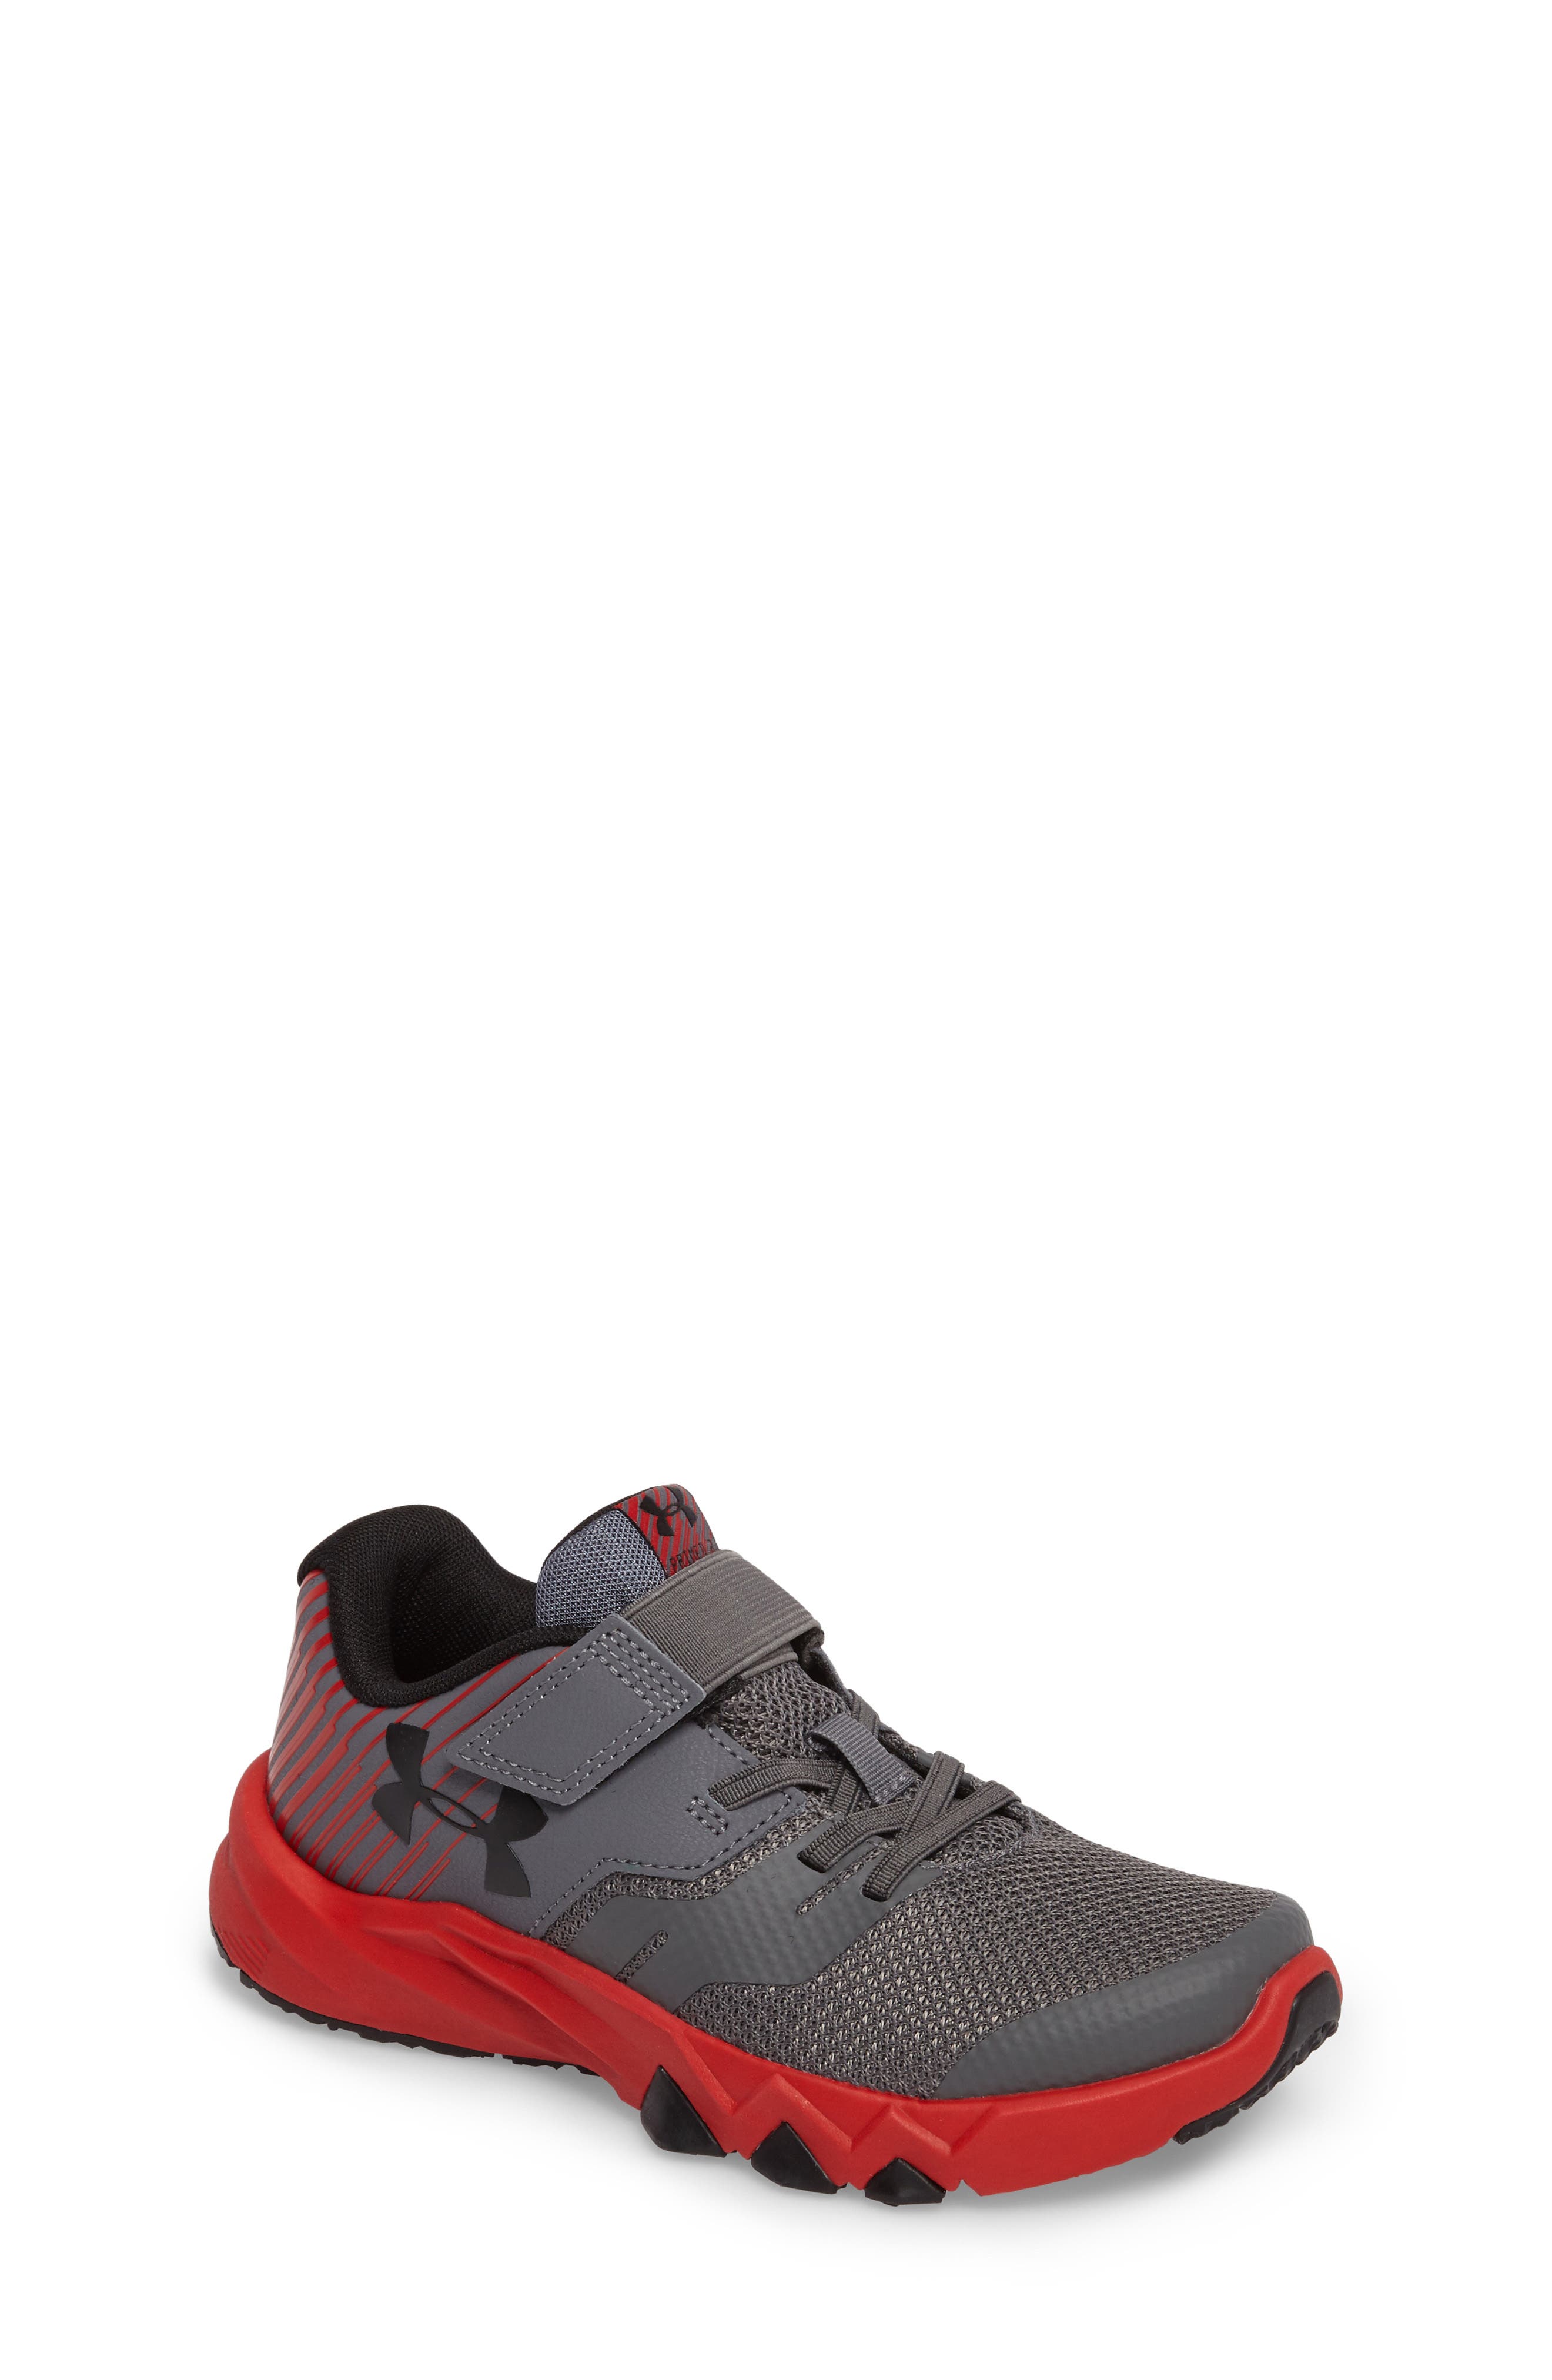 Cheap toddler boy under armour shoes Buy Online >OFF79 